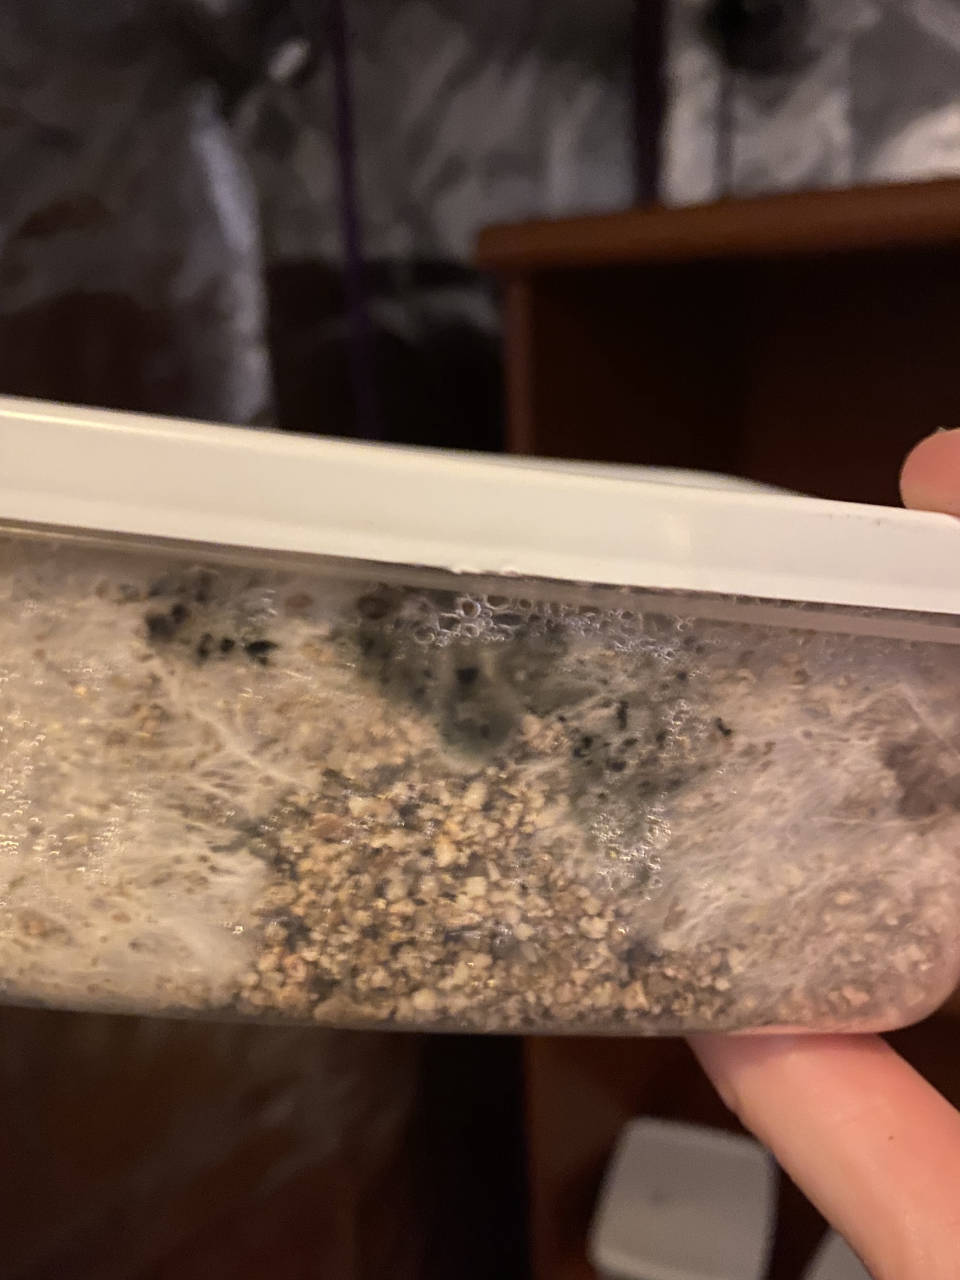 a close up showing mould growing in a mushroom mycelium block